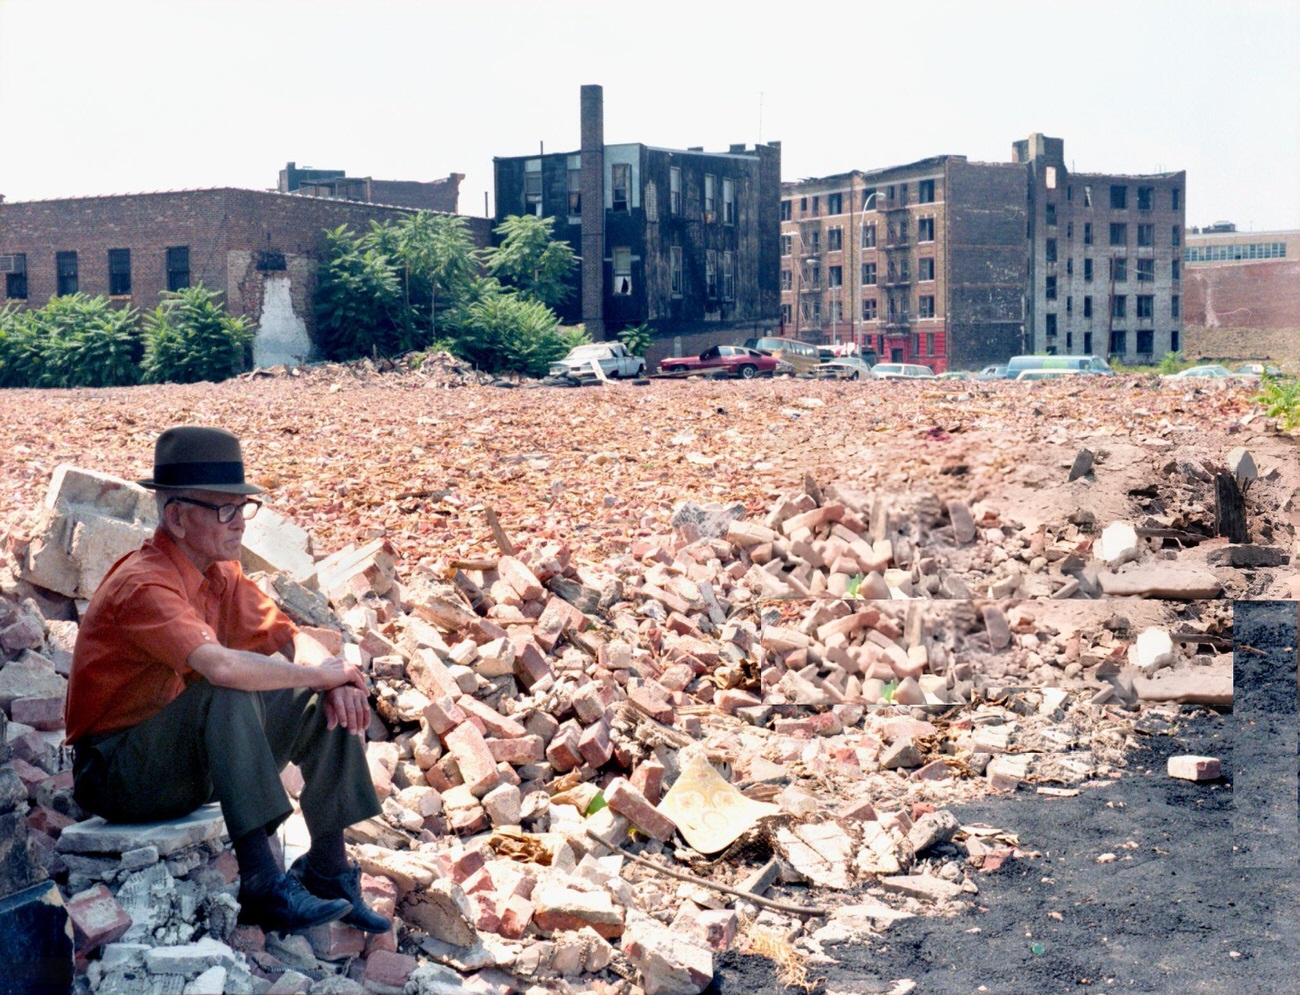 An Elderly Man Sits Among Rubble Of Bombed-Out Buildings In The South Bronx, August 1980.